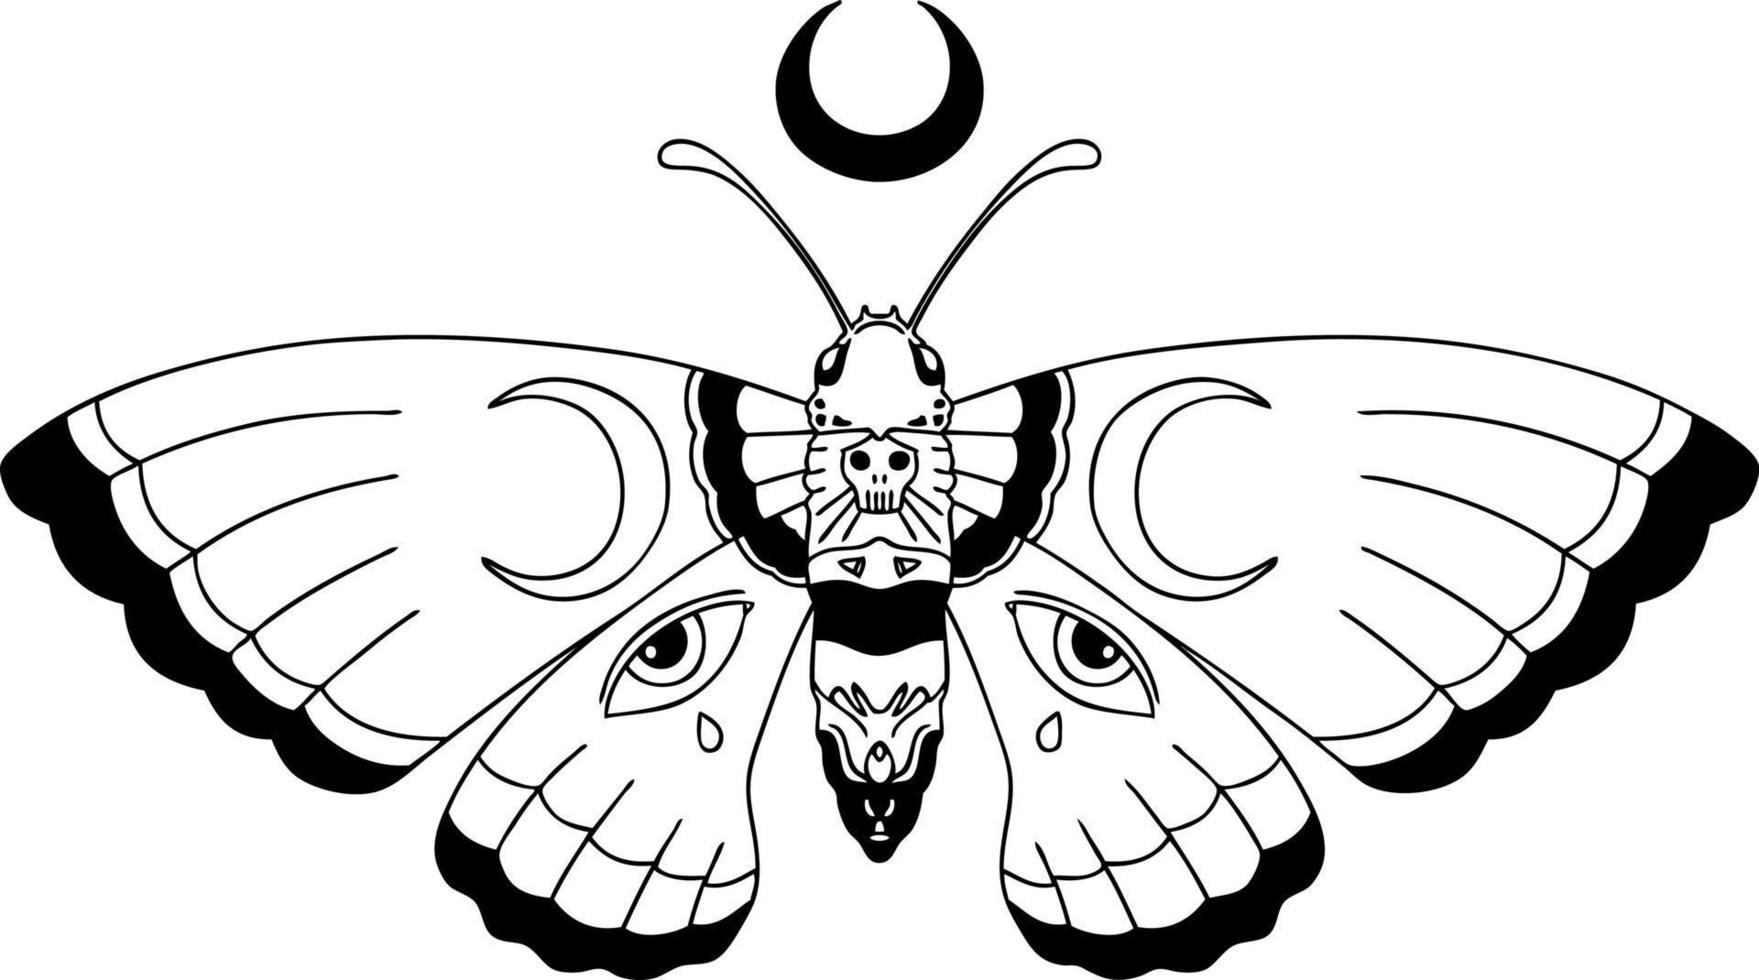 tattoo in black line style of a moth vector